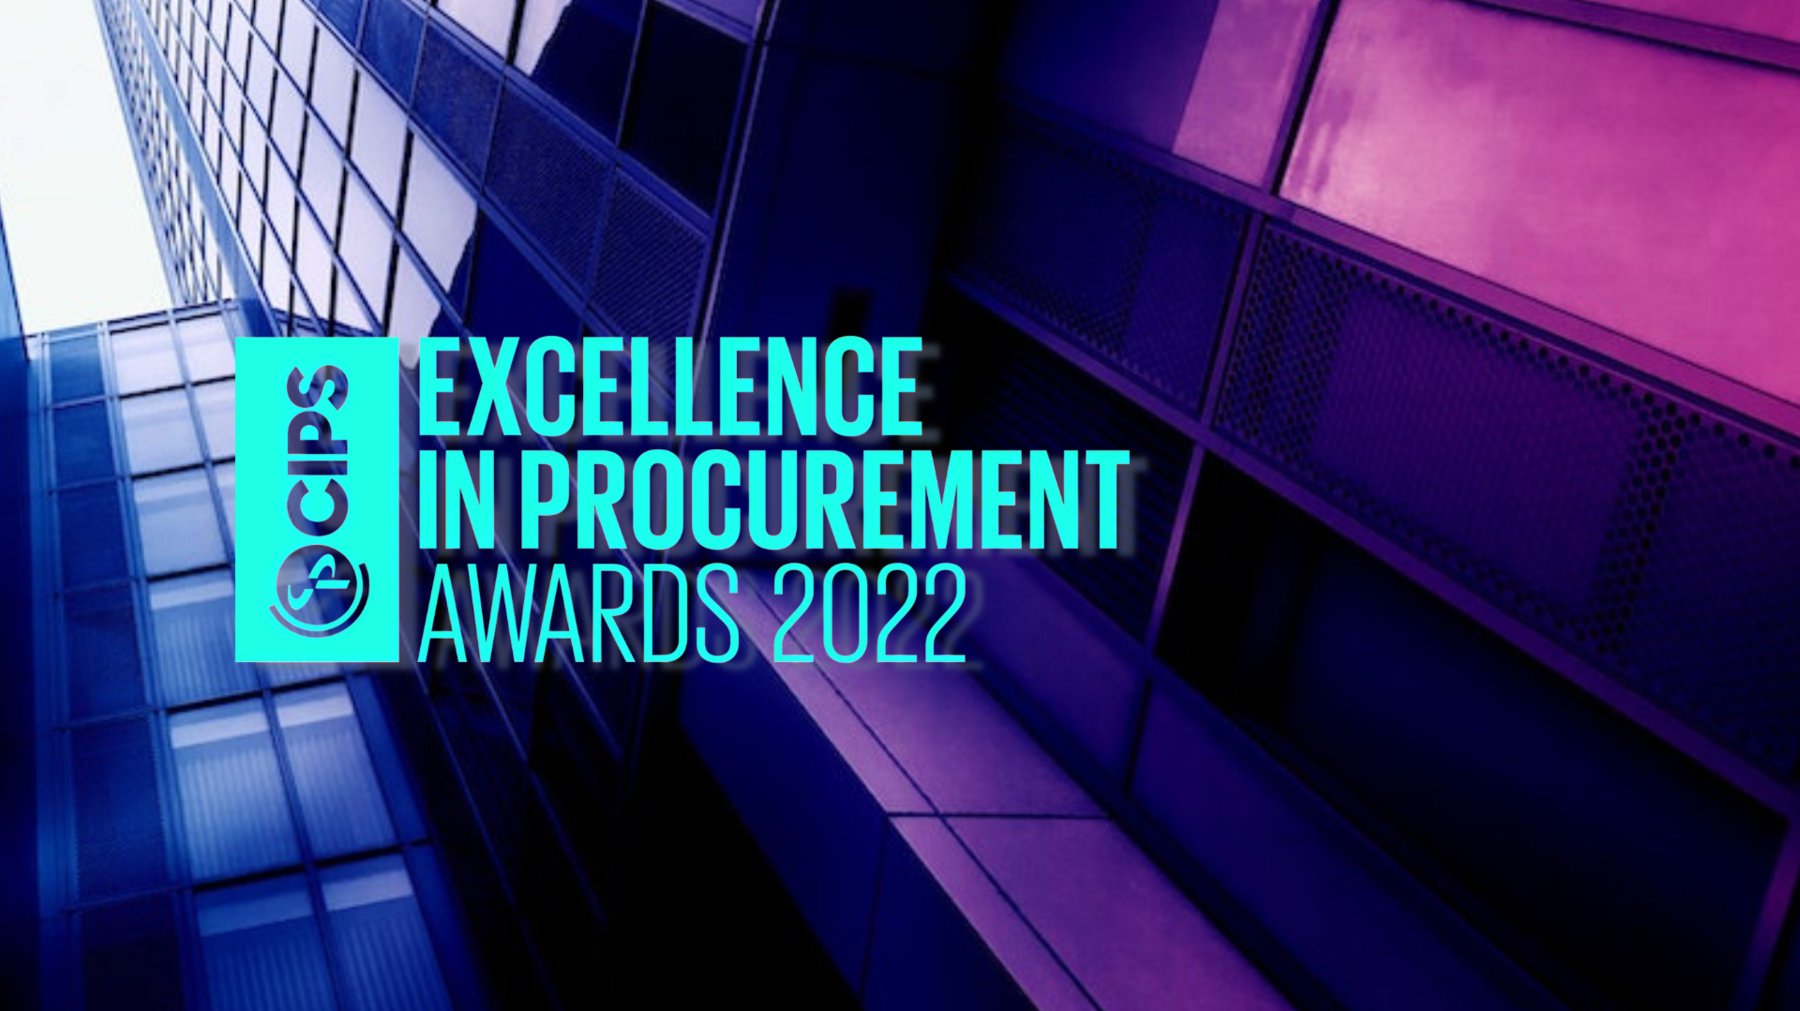 Schneider takes gold CIPS Excellence in Procurement Awards